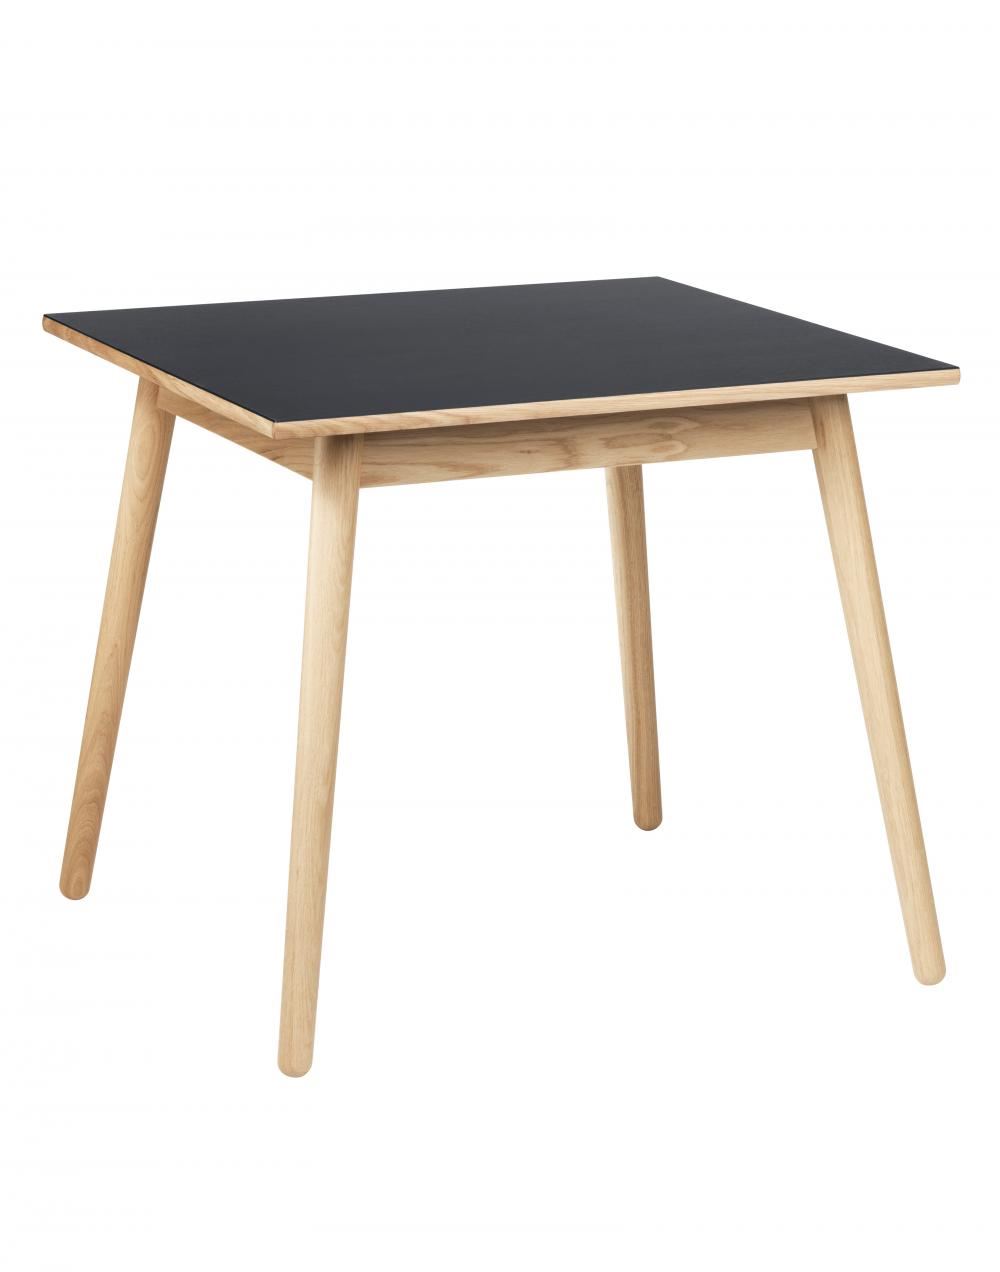 C35 Dining Table Small Medium Small Oak With Black Lino Top None